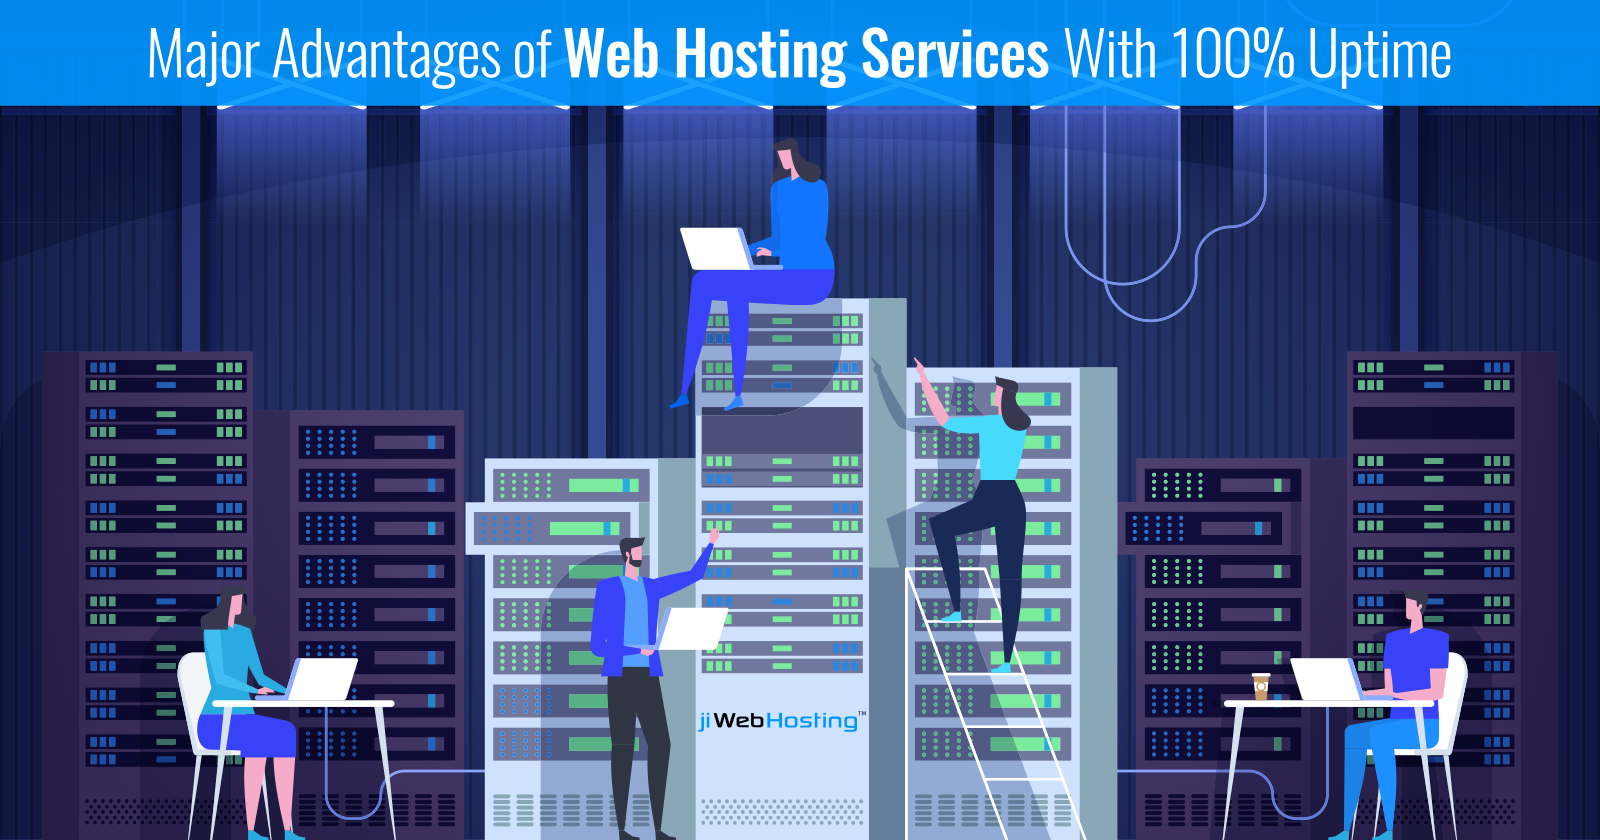 Major Advantages of Web Hosting Services With 100% Uptime